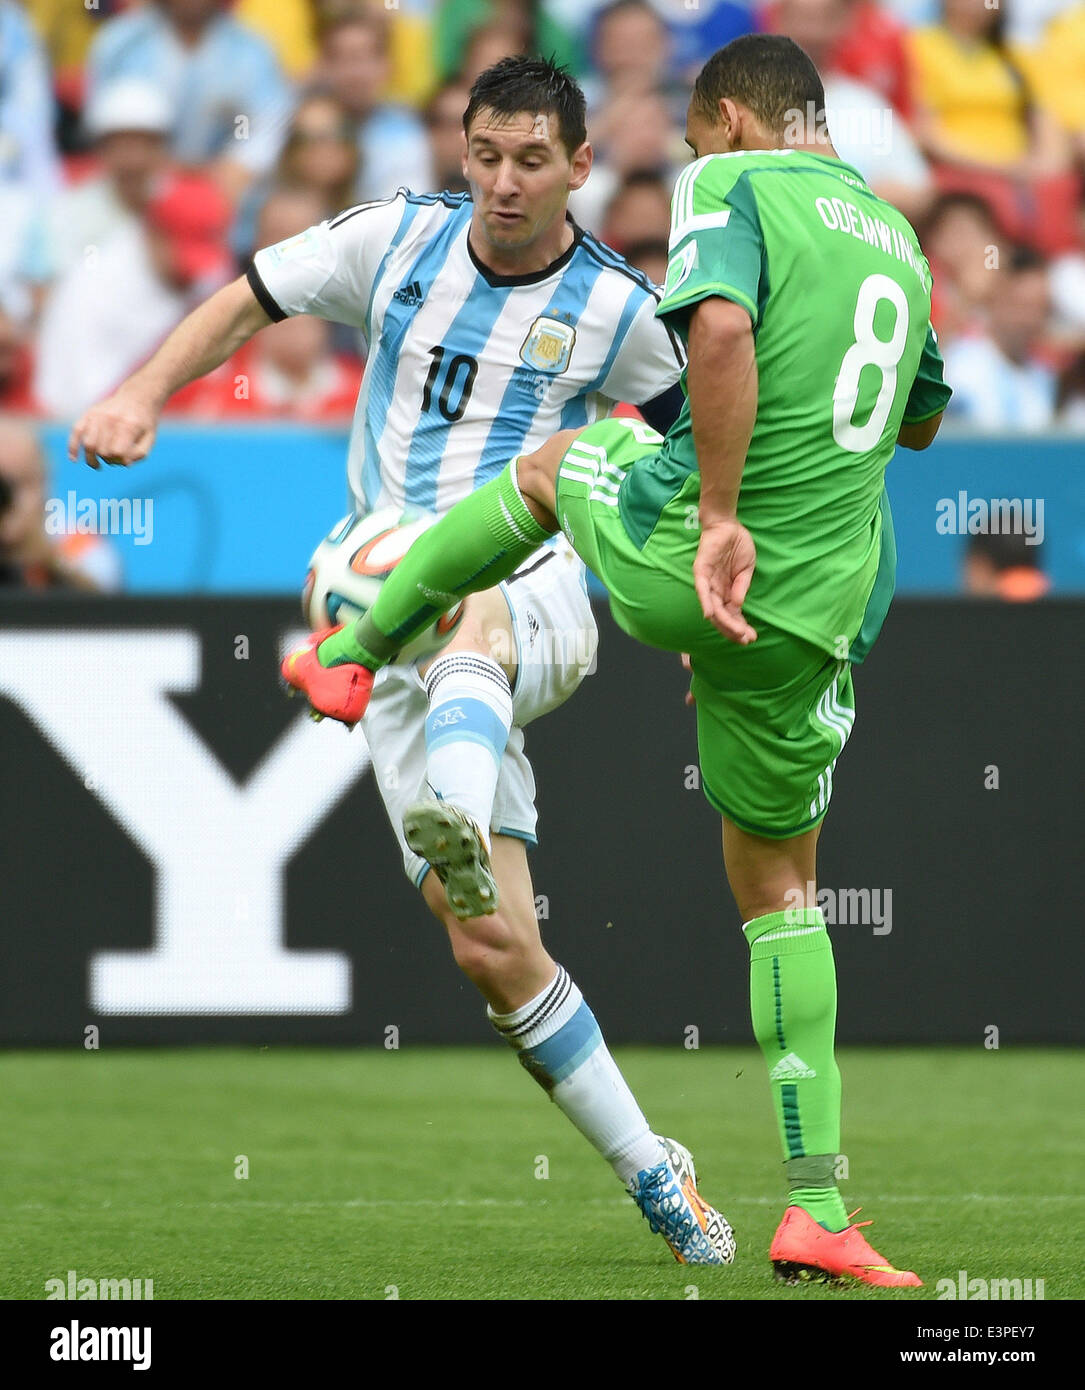 Porto Alegre, Brazil. 25th June, 2014. Argentina's Lionel Messi (L) vies with Nigeria's Peter Osaze Odemwingie during a Group F match between Nigeria and Argentina of 2014 FIFA World Cup at the Estadio Beira-Rio Stadium in Porto Alegre, Brazil, on June 25, 2014. Argentina won 3-2 over Nigeria on Wednesday. © Li Ga/Xinhua/Alamy Live News Stock Photo